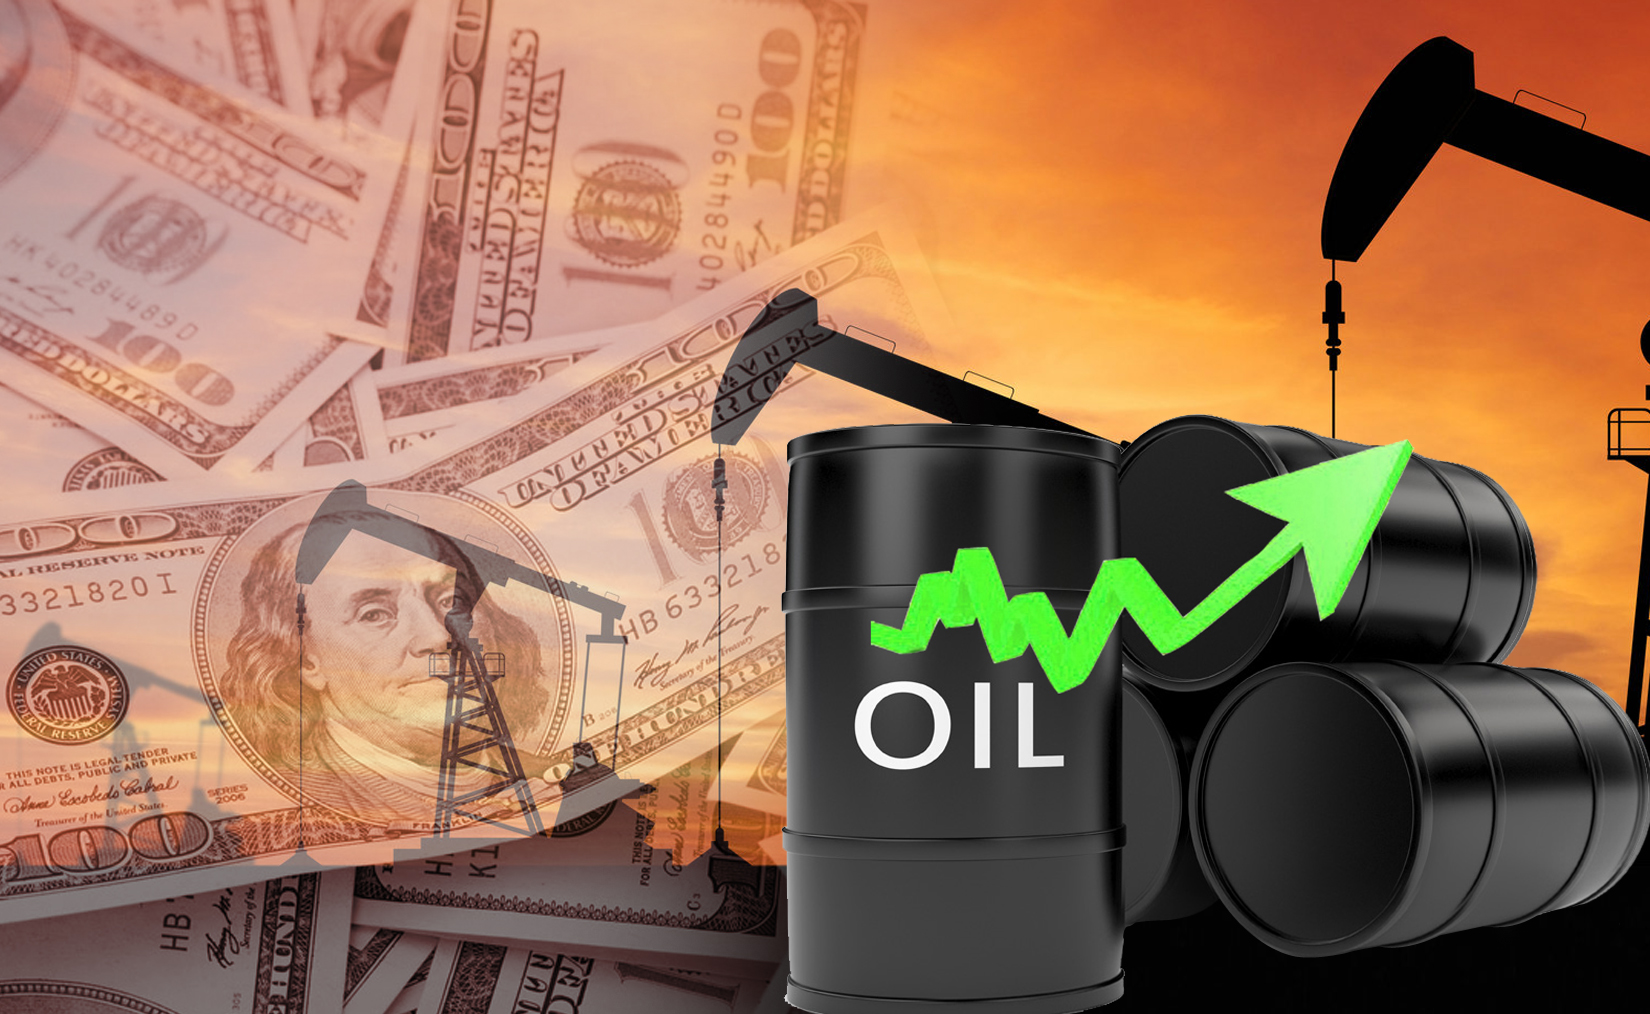 Kuwait oil price goes up by USD 1.67 to USD 89.64 pb                                                                                                                                                                                                      